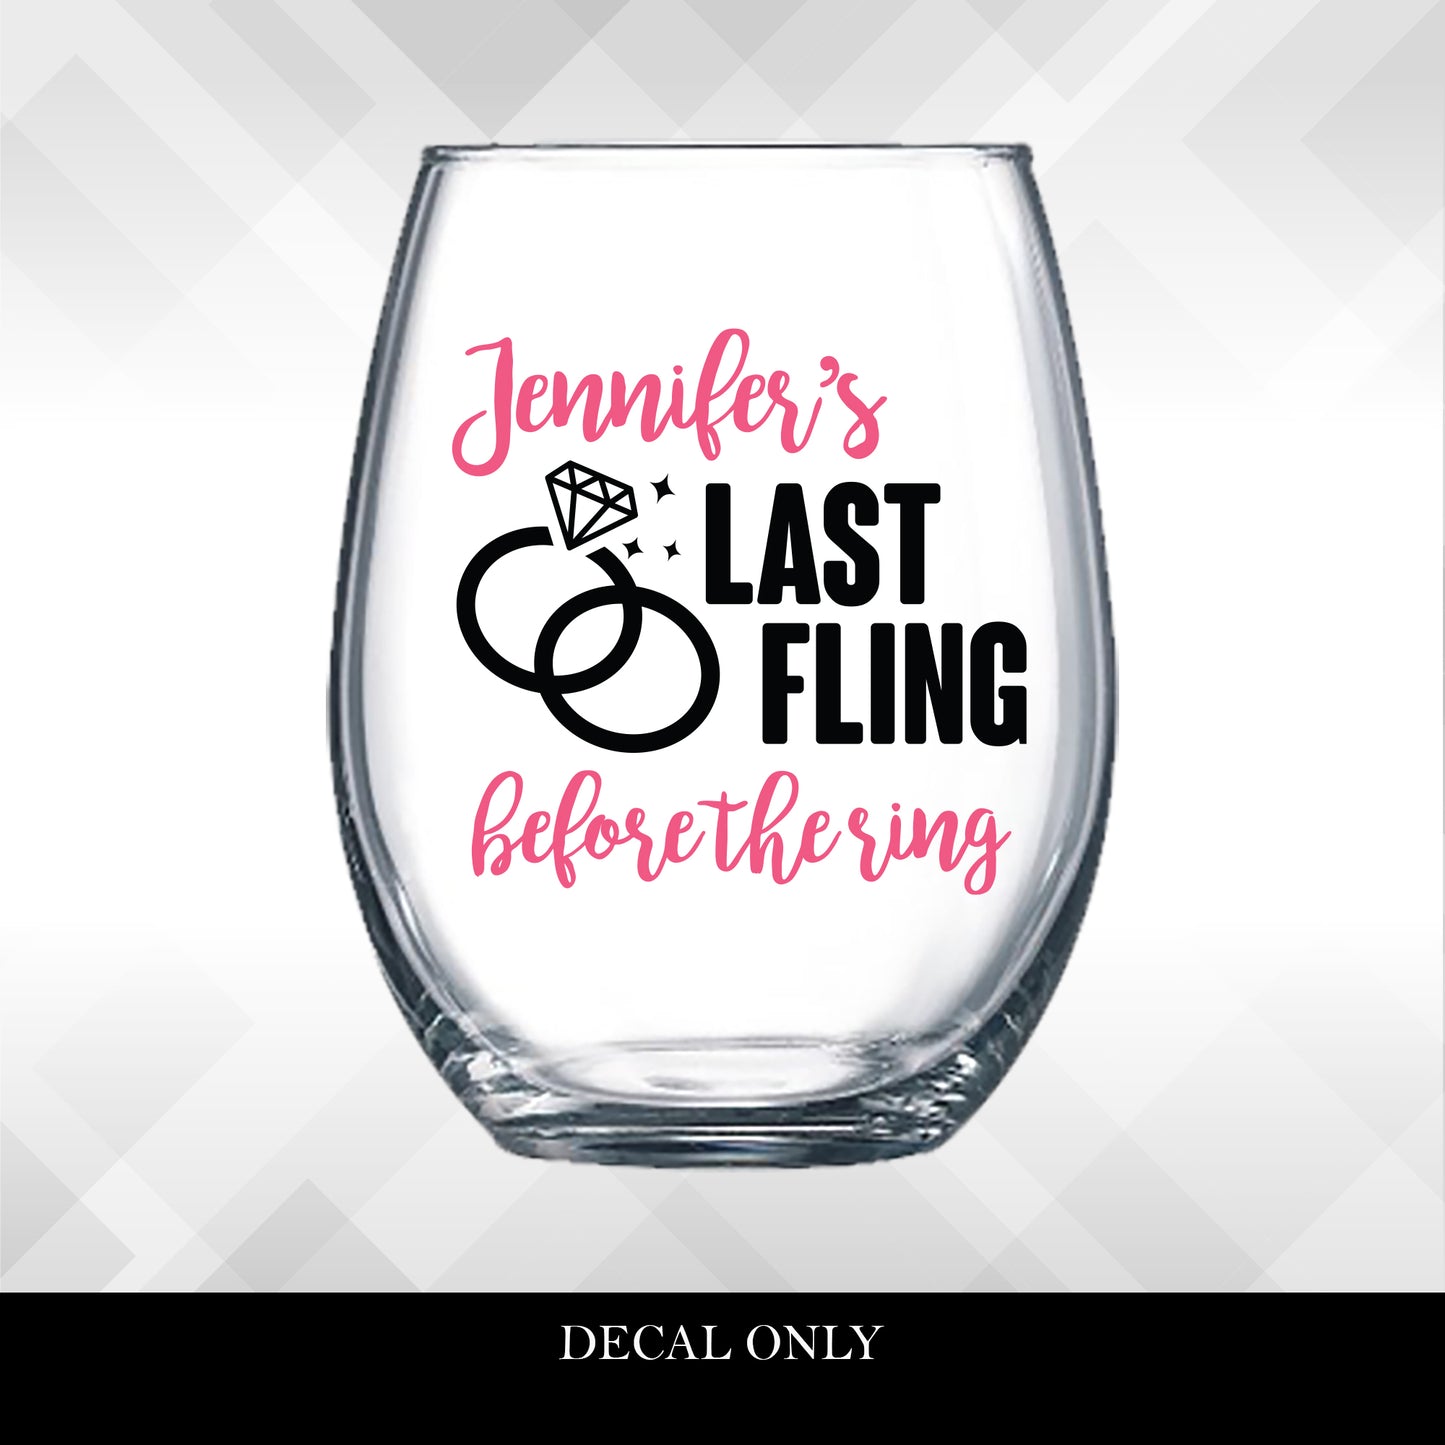 Last Fling Before the Ring - Bachelorette Weekend Party for Wine Glass or Plastic Tumbler DECALS